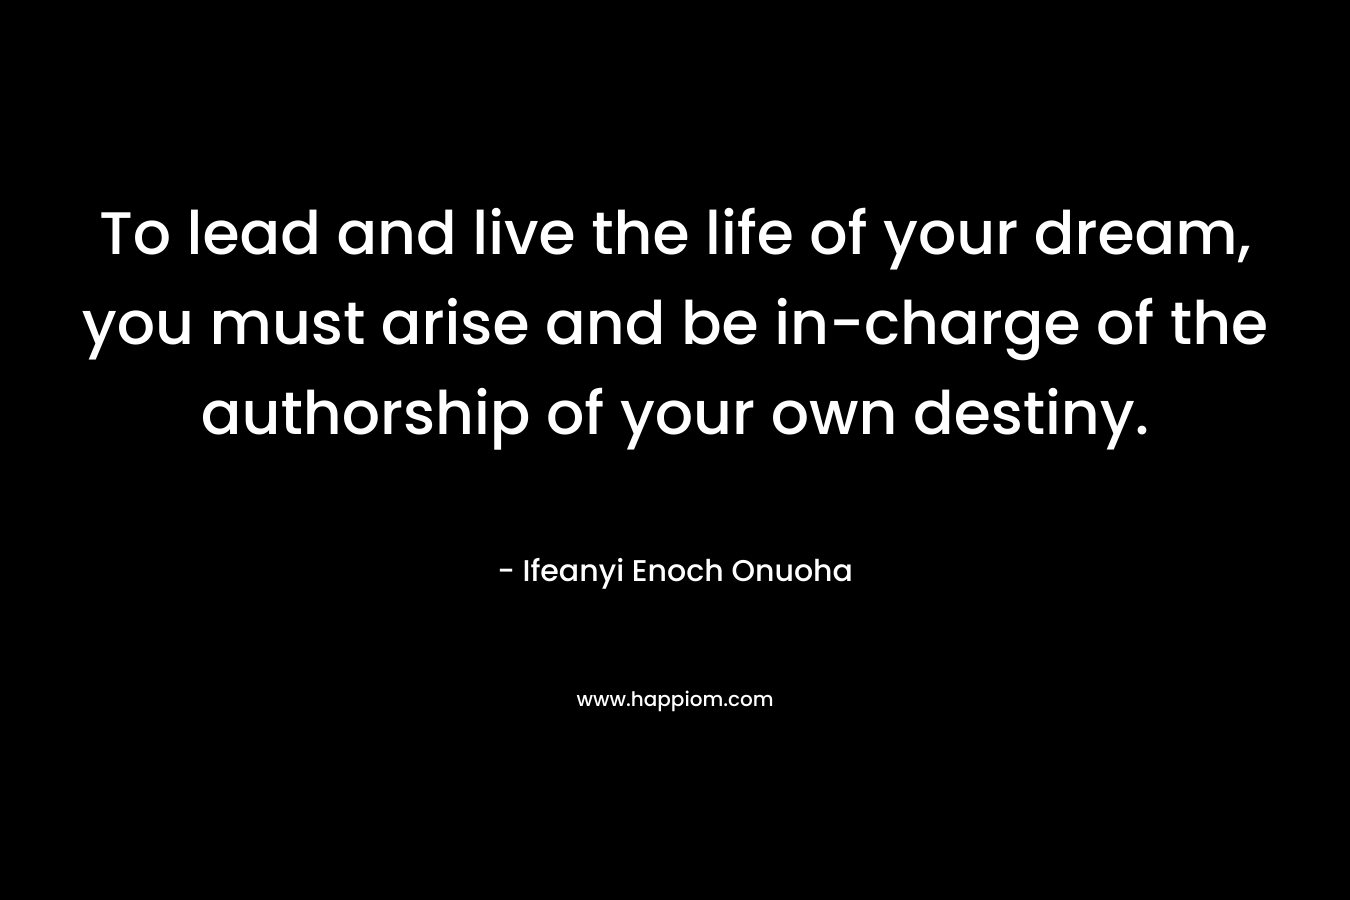 To lead and live the life of your dream, you must arise and be in-charge of the authorship of your own destiny.